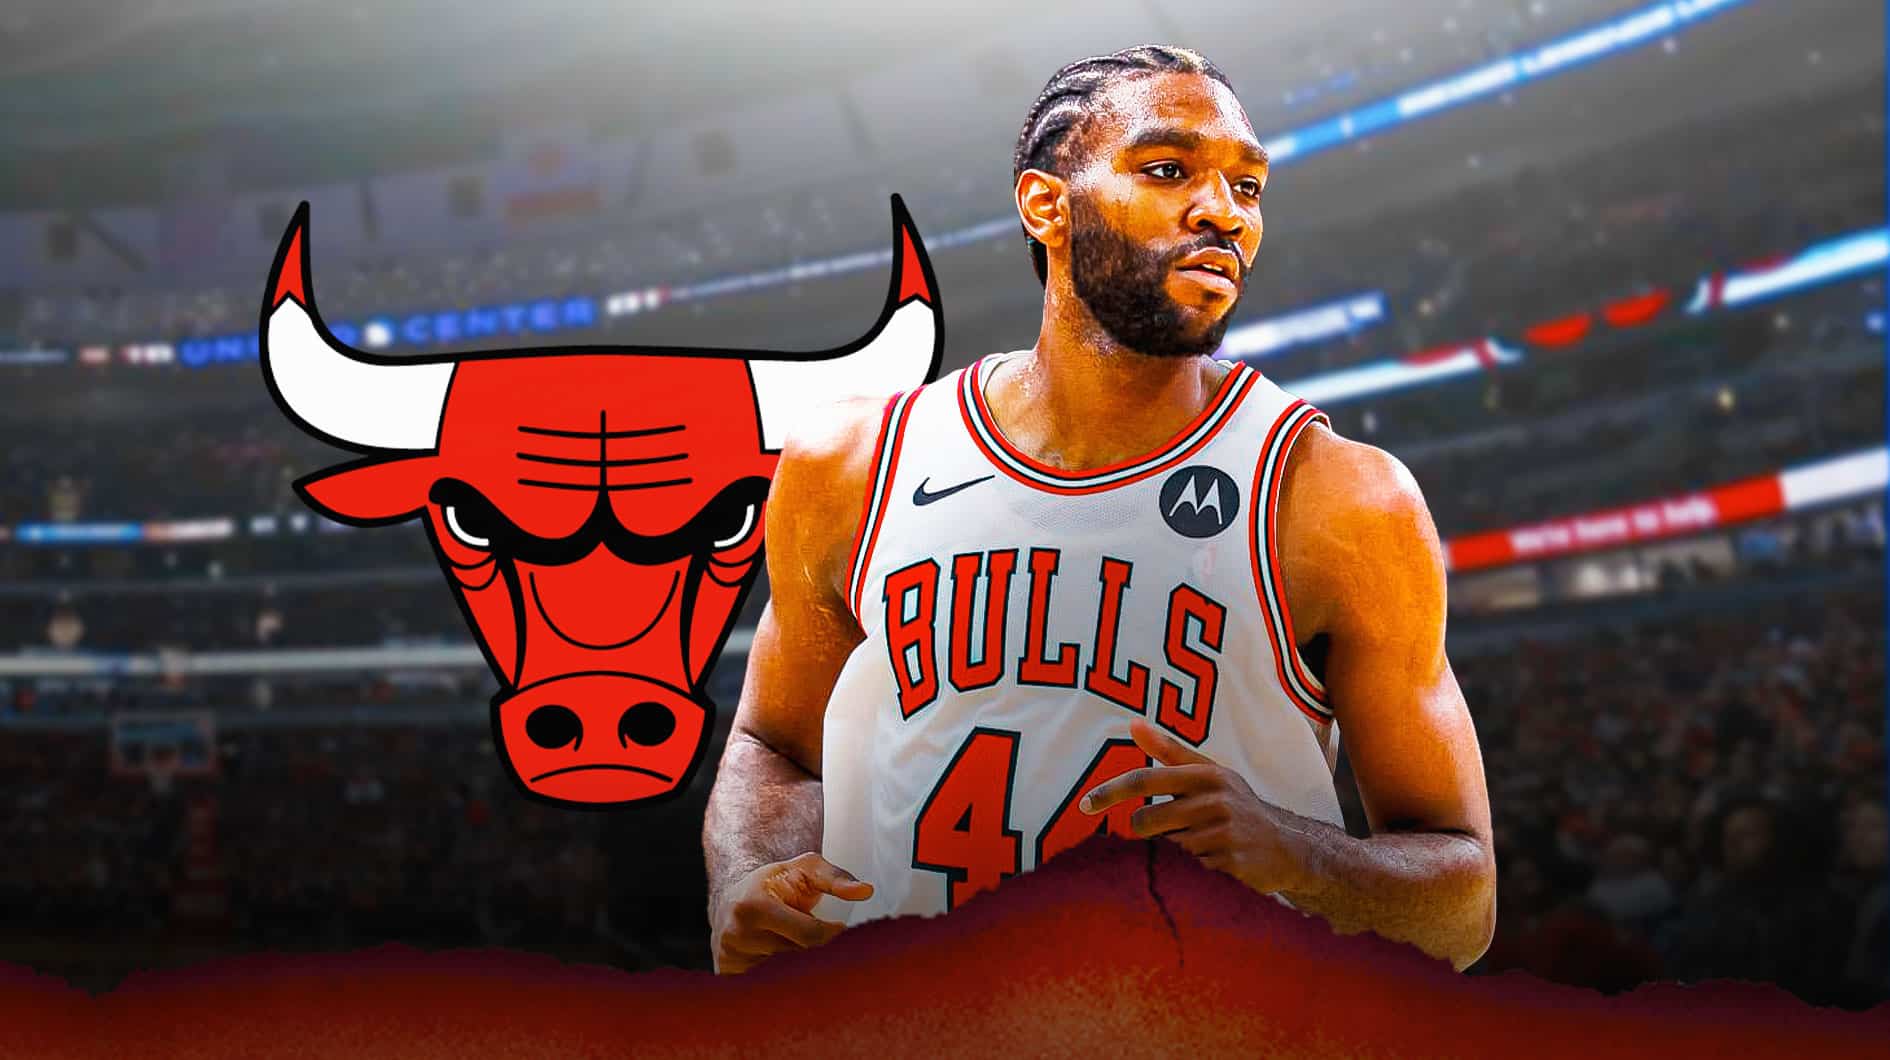 Bulls' Patrick Williams drops truth on injury recovery after $90 million extension